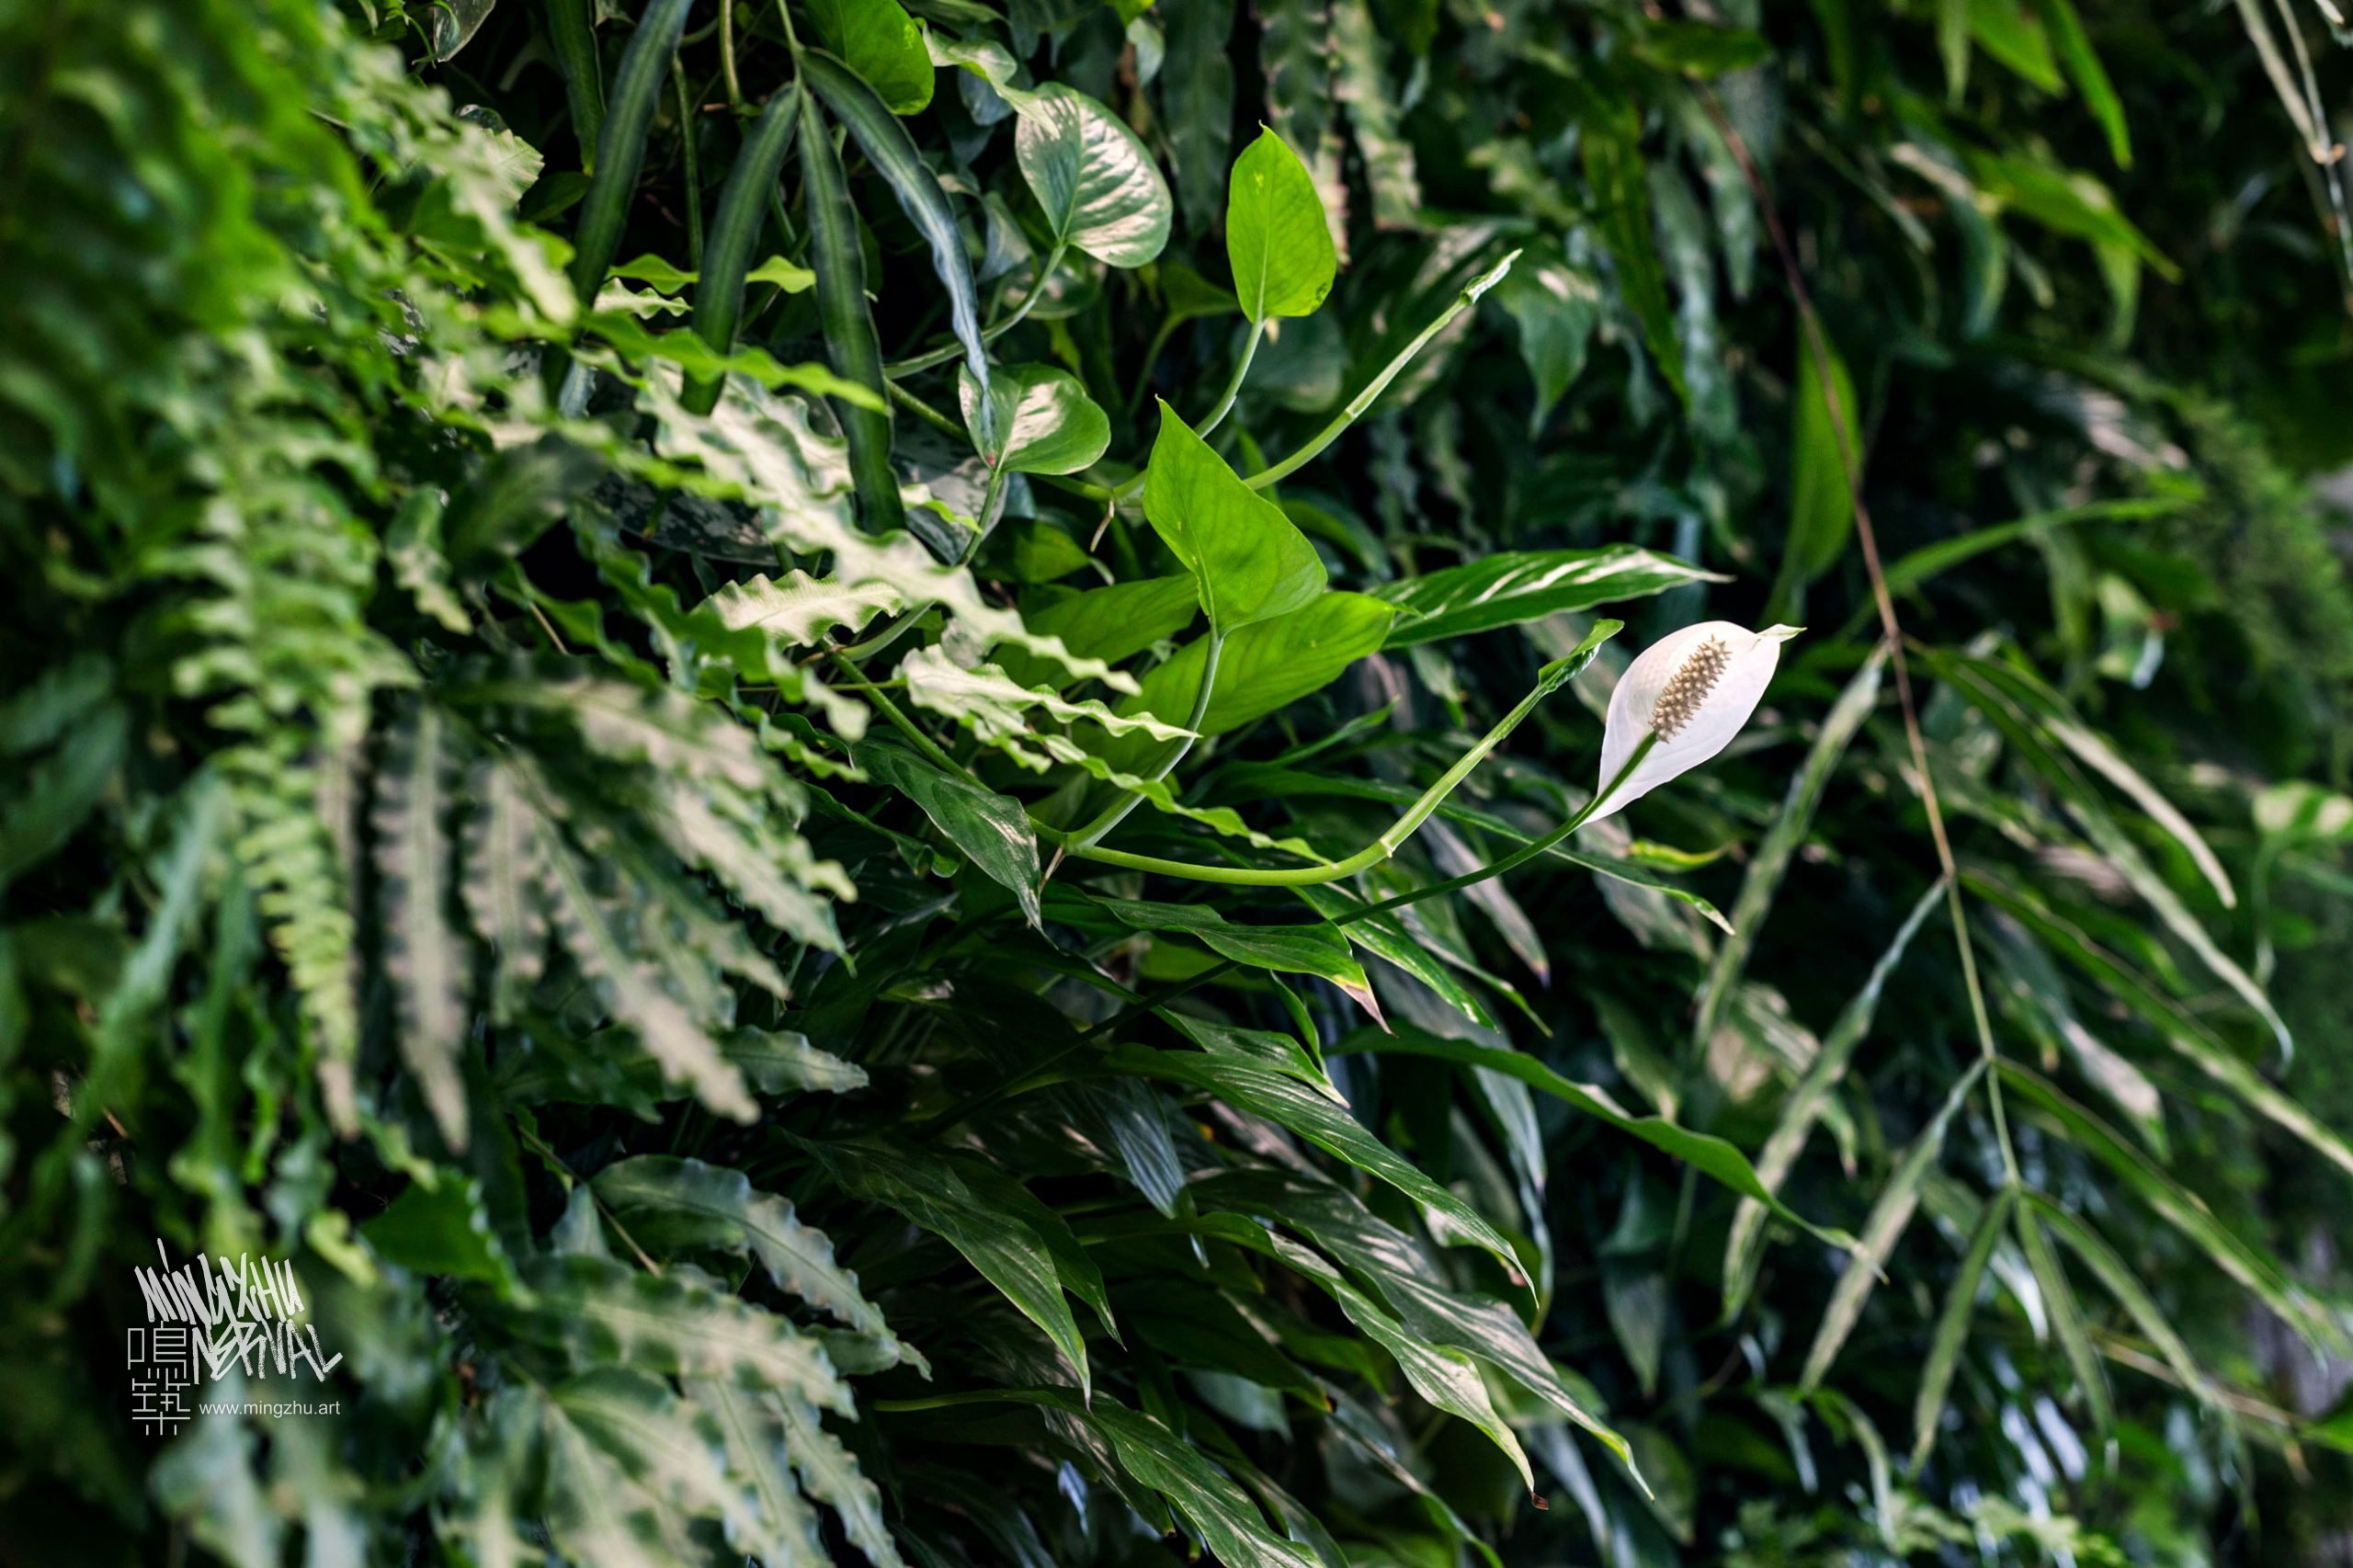 Mingzhu Nerval vertical living wall experts created a healthy nature workspace at SCA in Shanghai, 2011